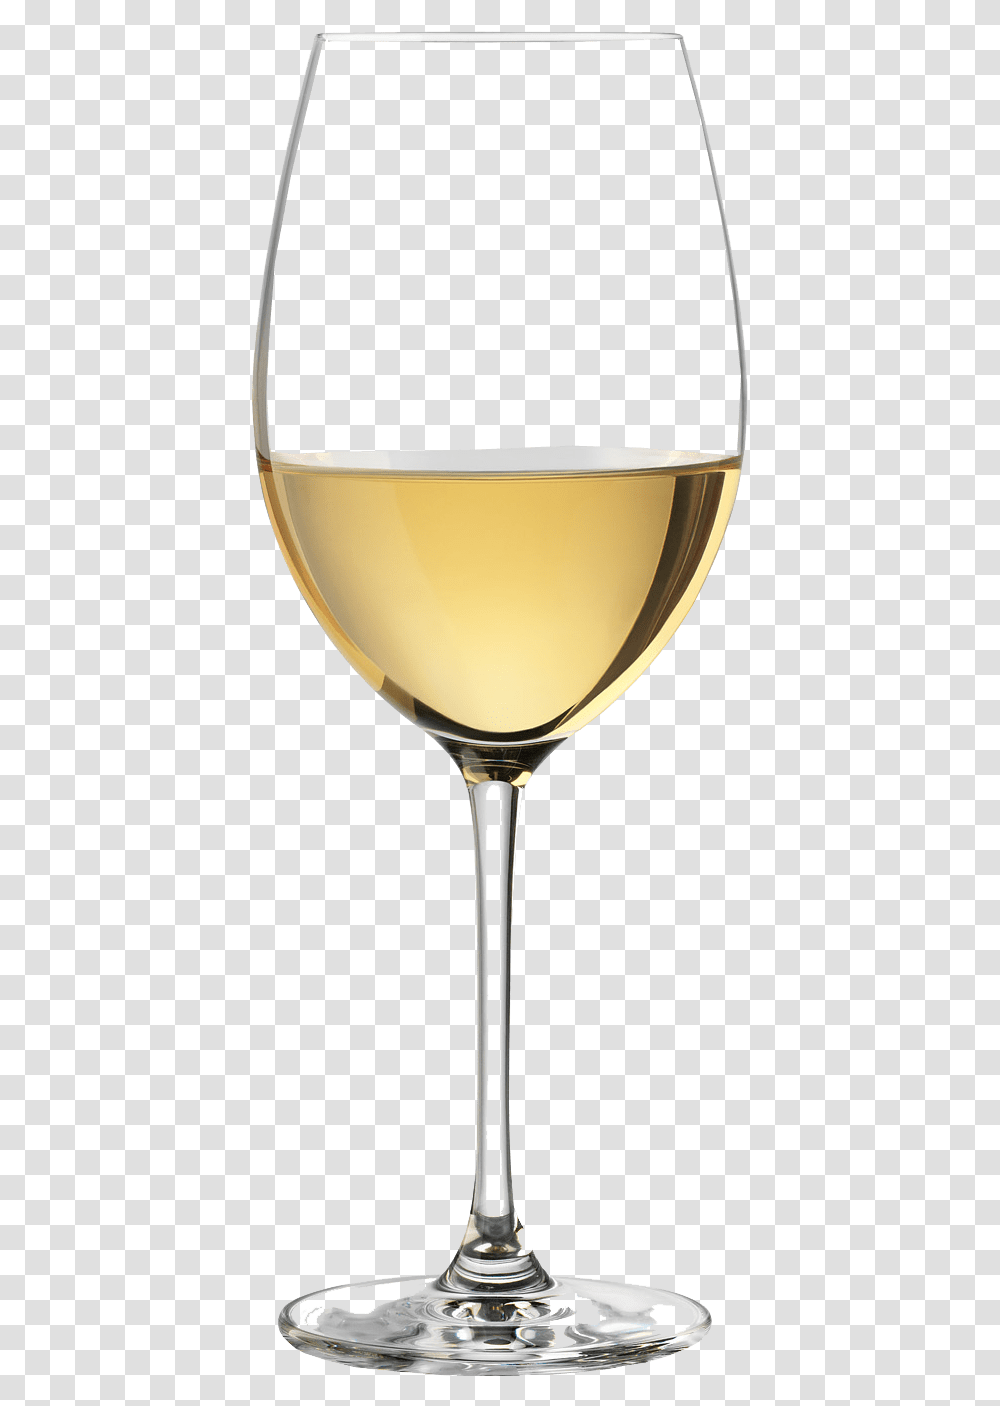 White Wine Glass Image Glass Of Wine, Lamp, Alcohol, Beverage, Drink Transparent Png